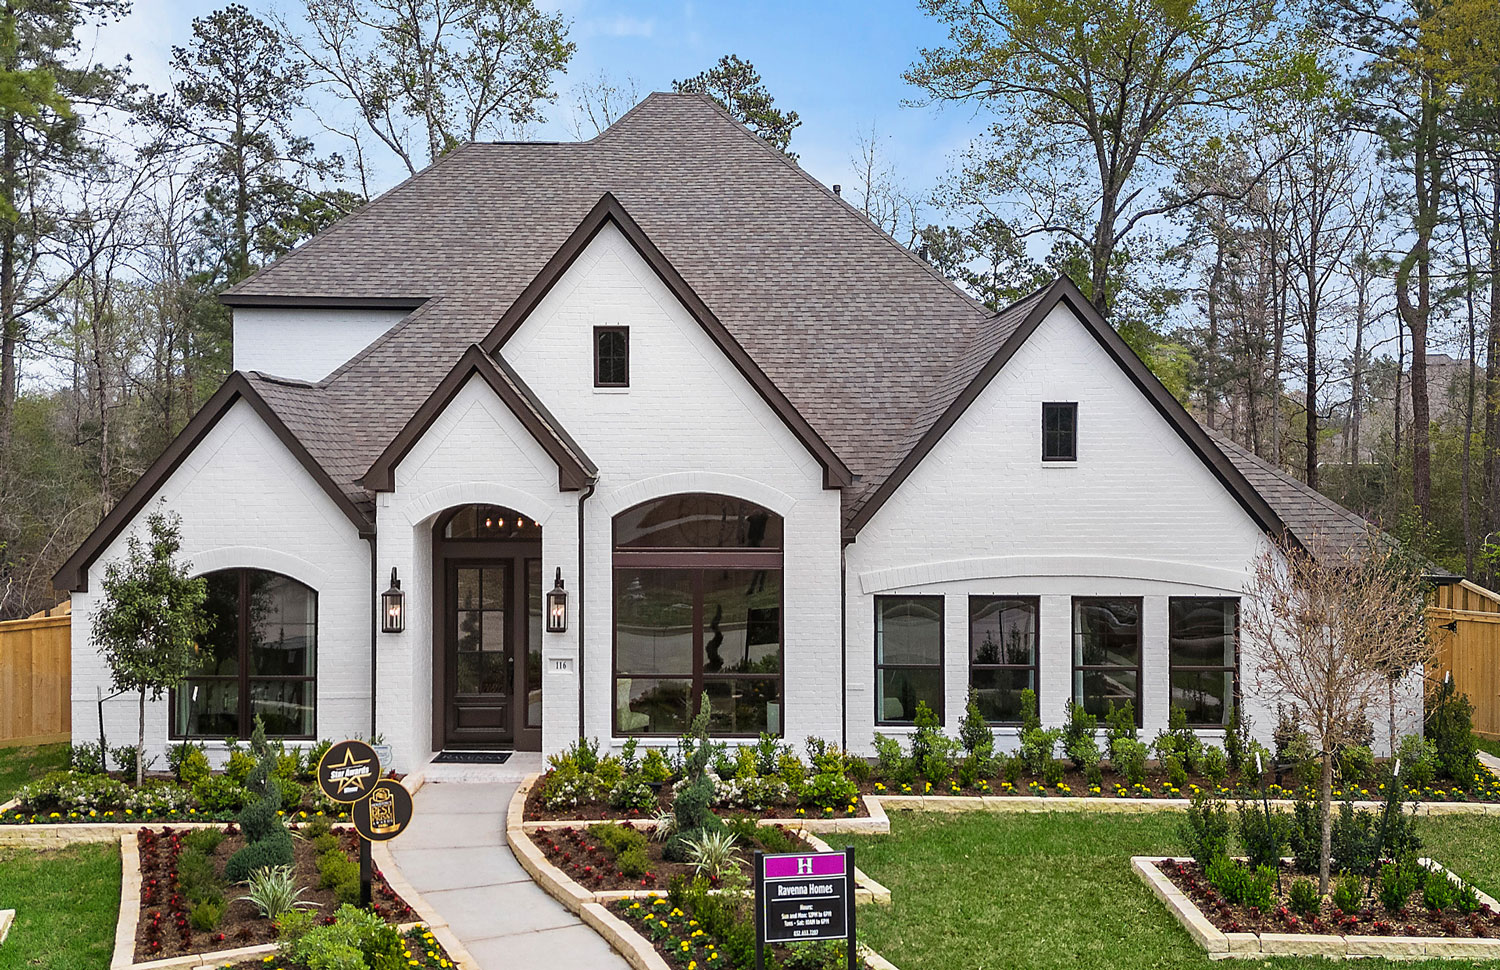 Ravenna Homes new model home in The Woodlands Hills